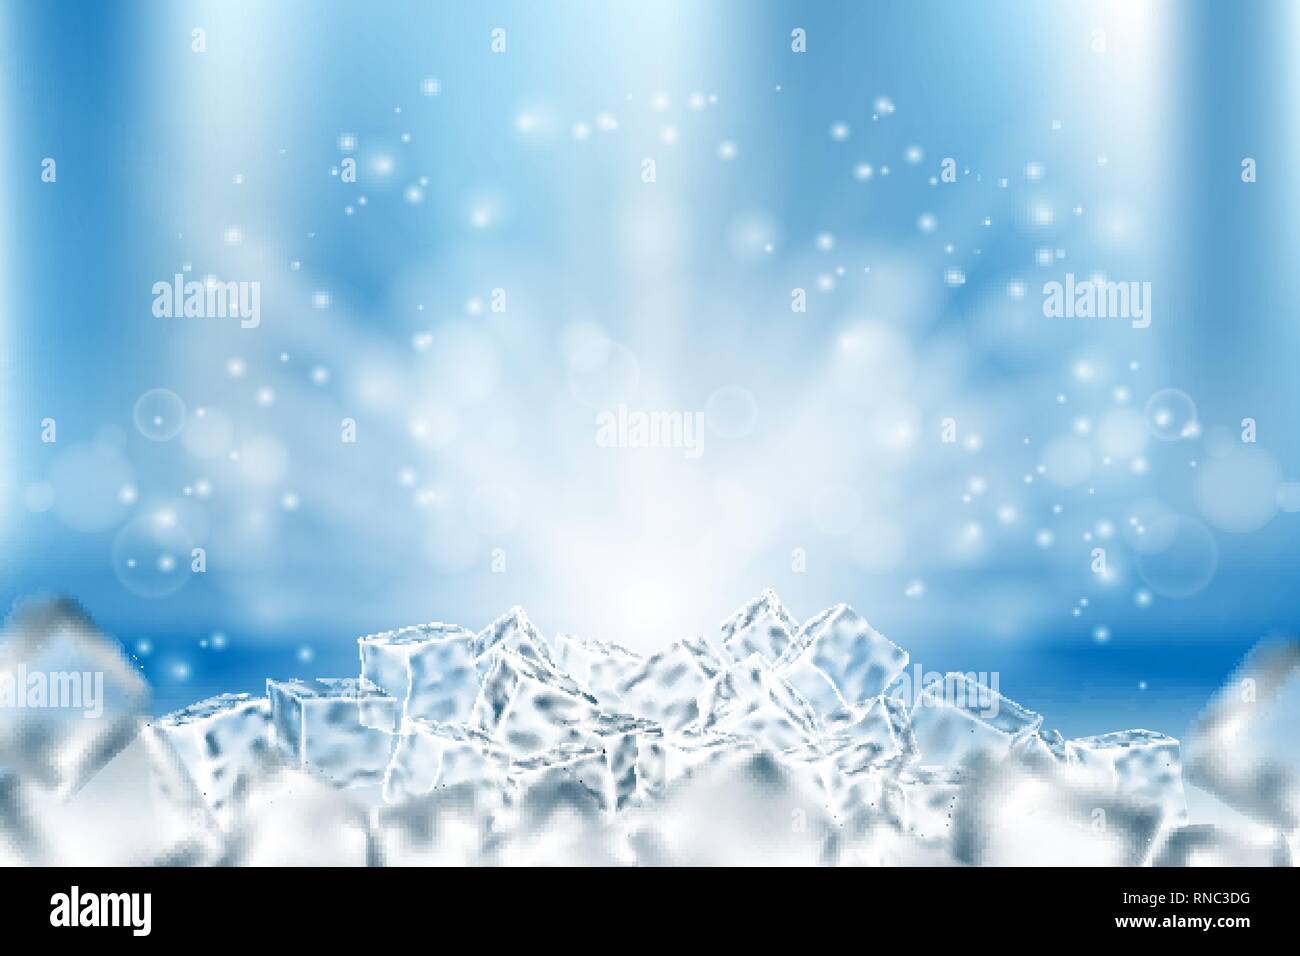 Abstract icy cubes background. Abstract ice and snow in light blue poster design, 3d illustration Stock Vector